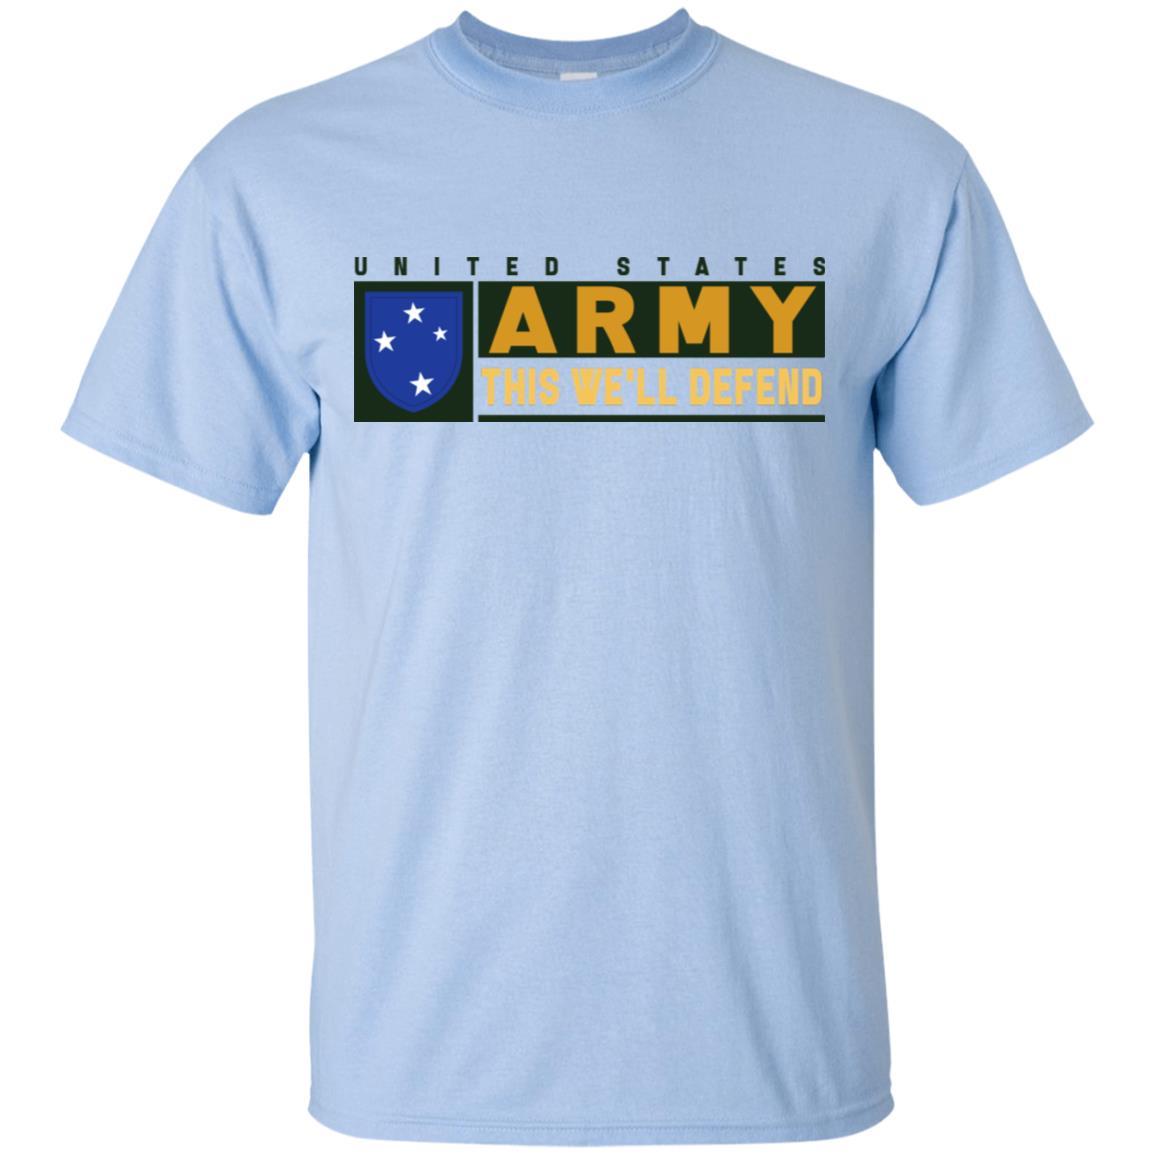 US Army 23rd Infantry Division- This We'll Defend T-Shirt On Front For Men-TShirt-Army-Veterans Nation